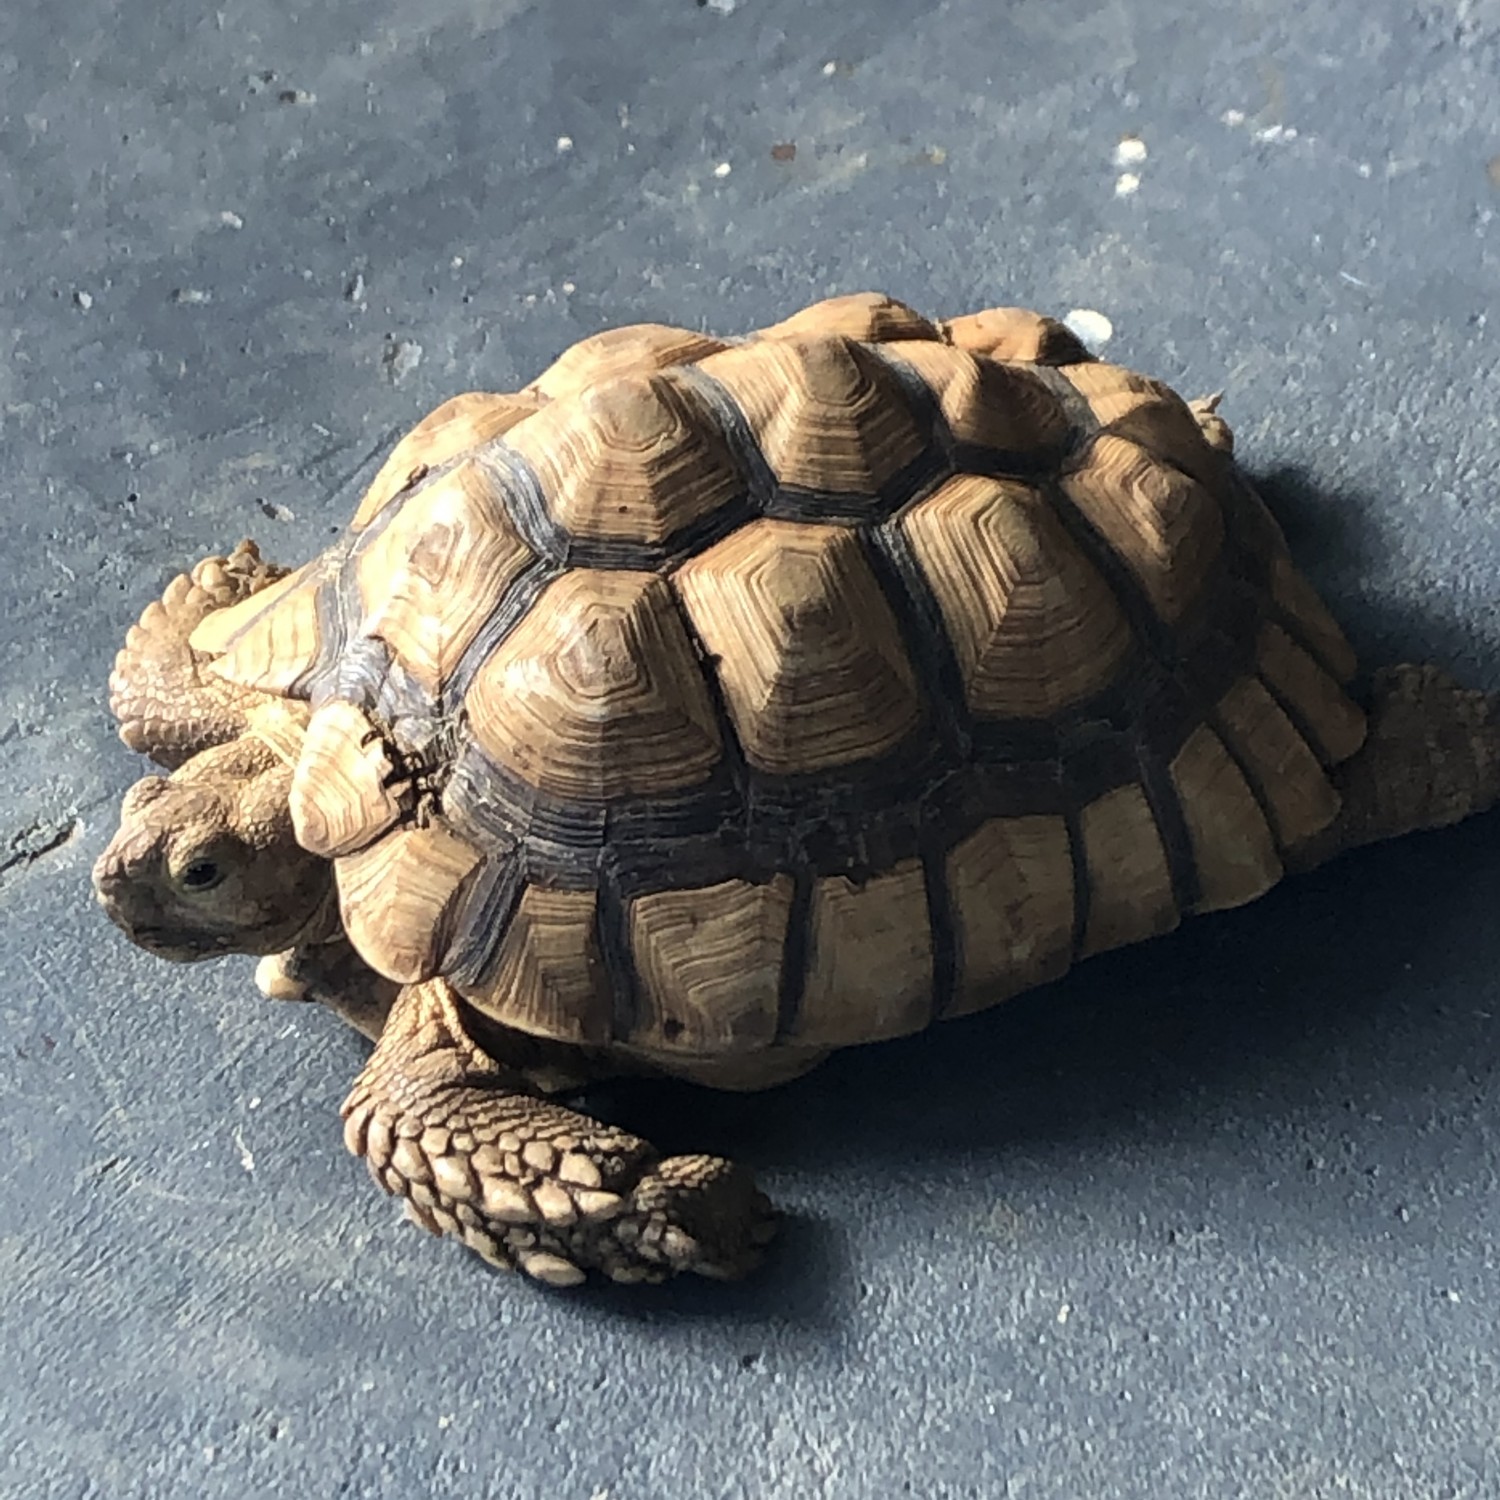 Dr. Dale's sulcata tortoise, Vic, on her lanai in Kailua - Dale Veterinary Mobile Clinic